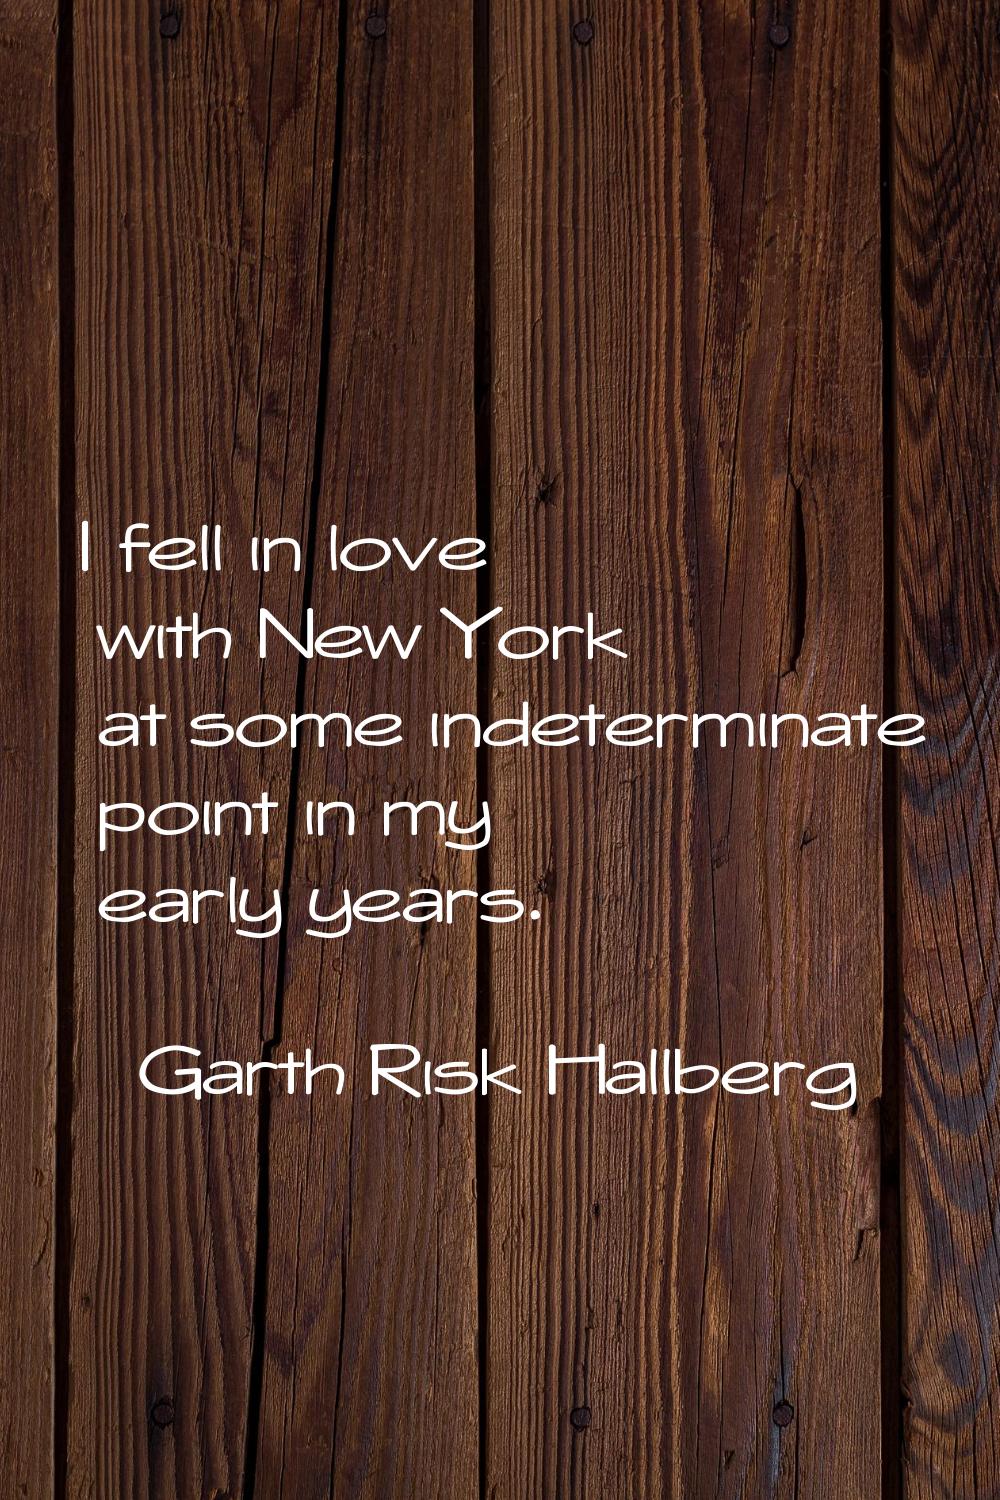 I fell in love with New York at some indeterminate point in my early years.